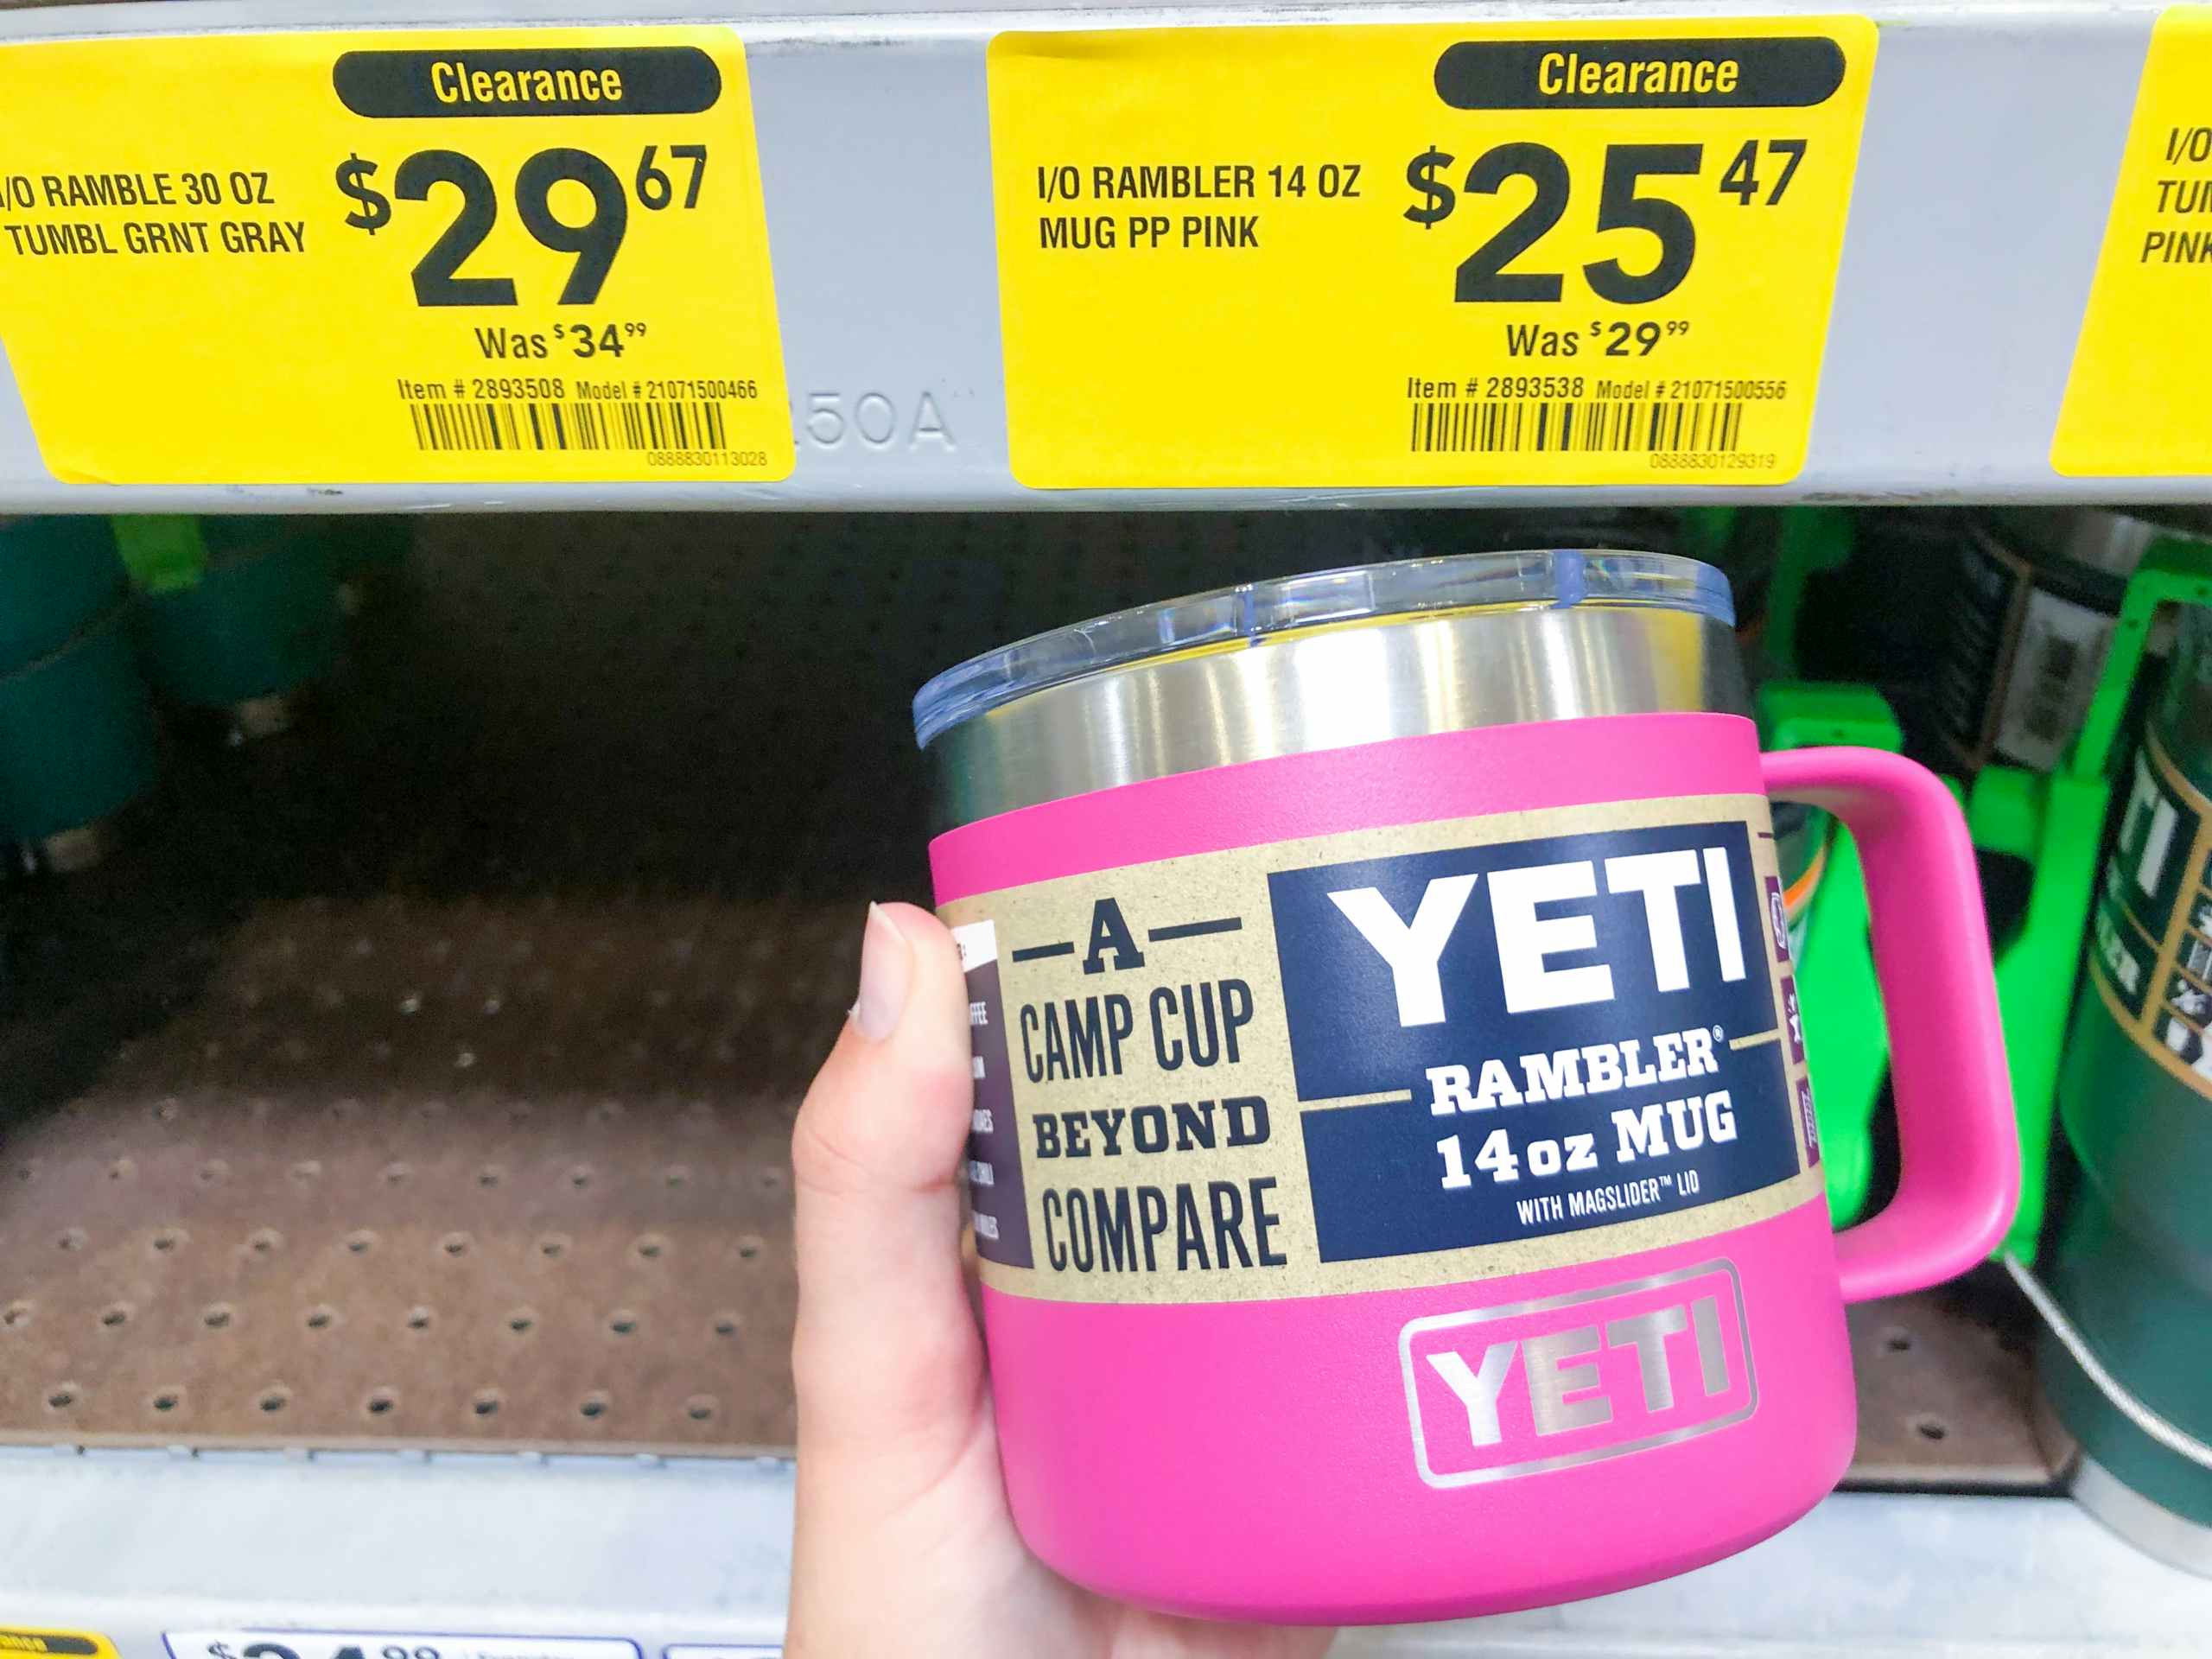 hand holding YETI mug in front of clearance display at Lowe's